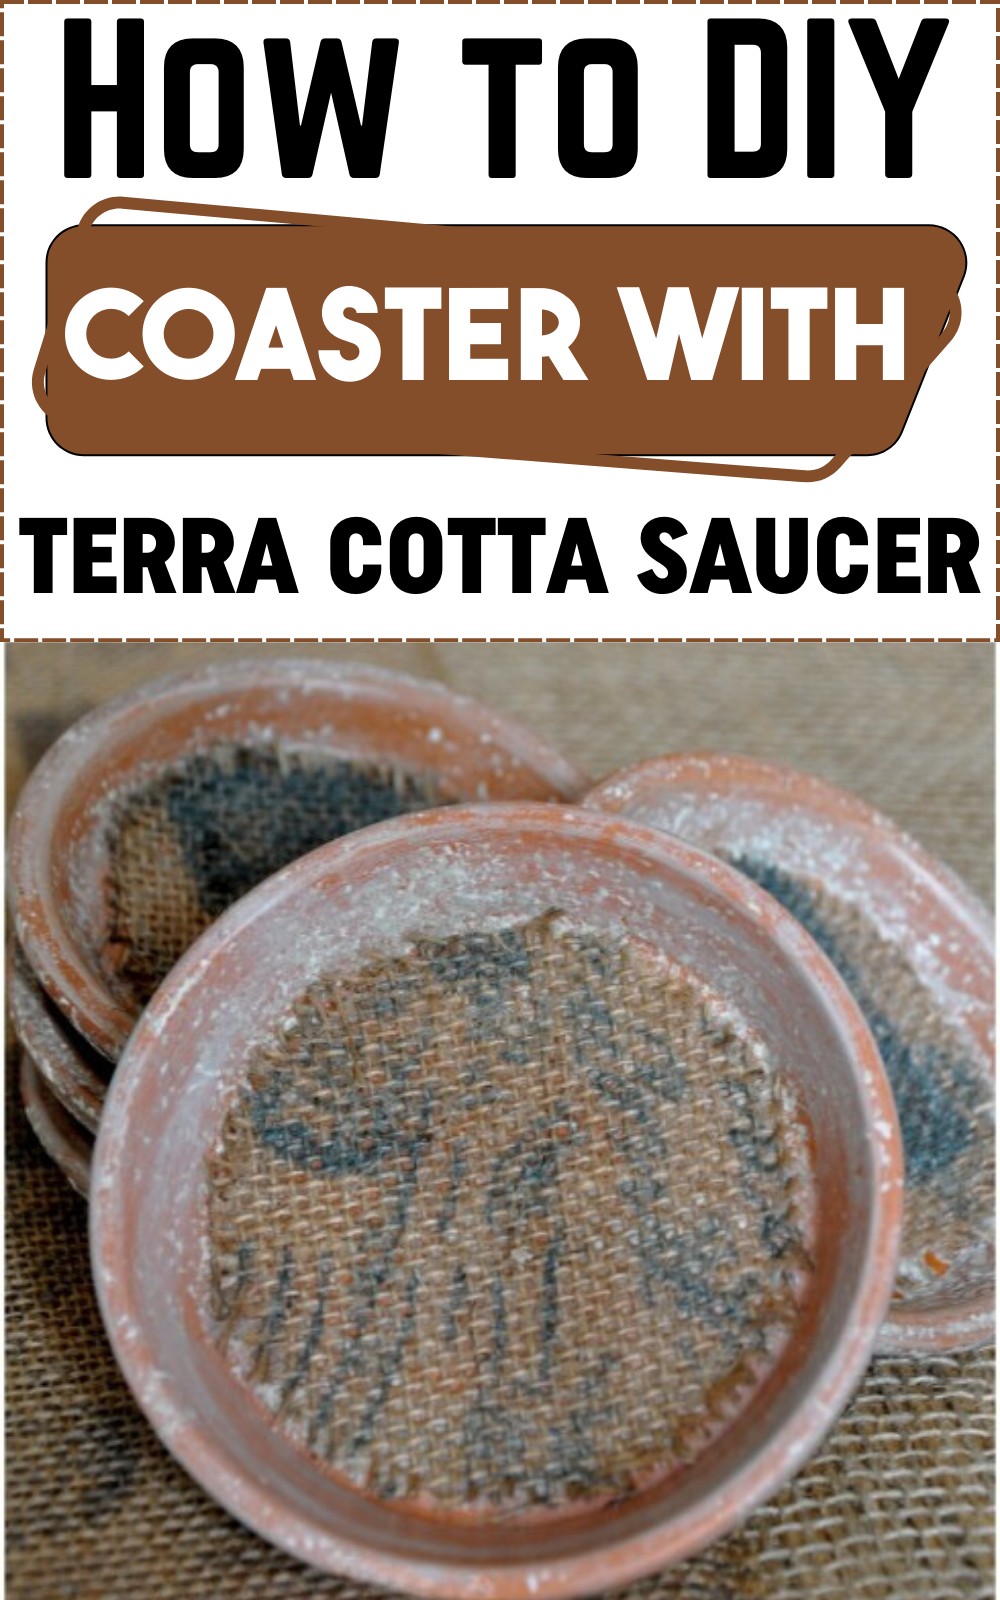 How to DIY Coaster With Terra Cotta Saucer